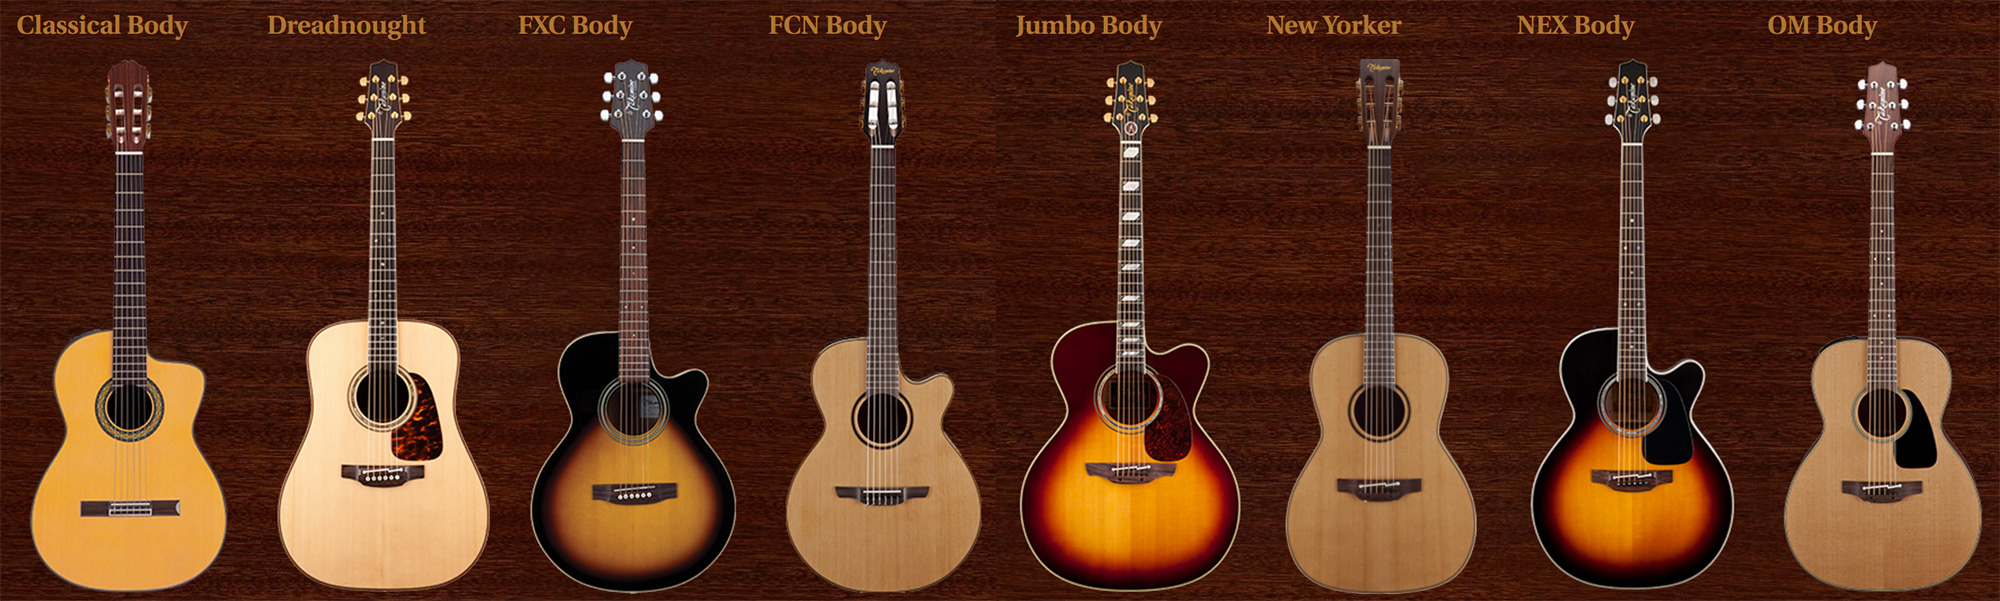 Takamine Gd71ce-nat Dreadnought Cw Epicea Palissandre - Natural Gloss - Guitare Electro Acoustique - Variation 5